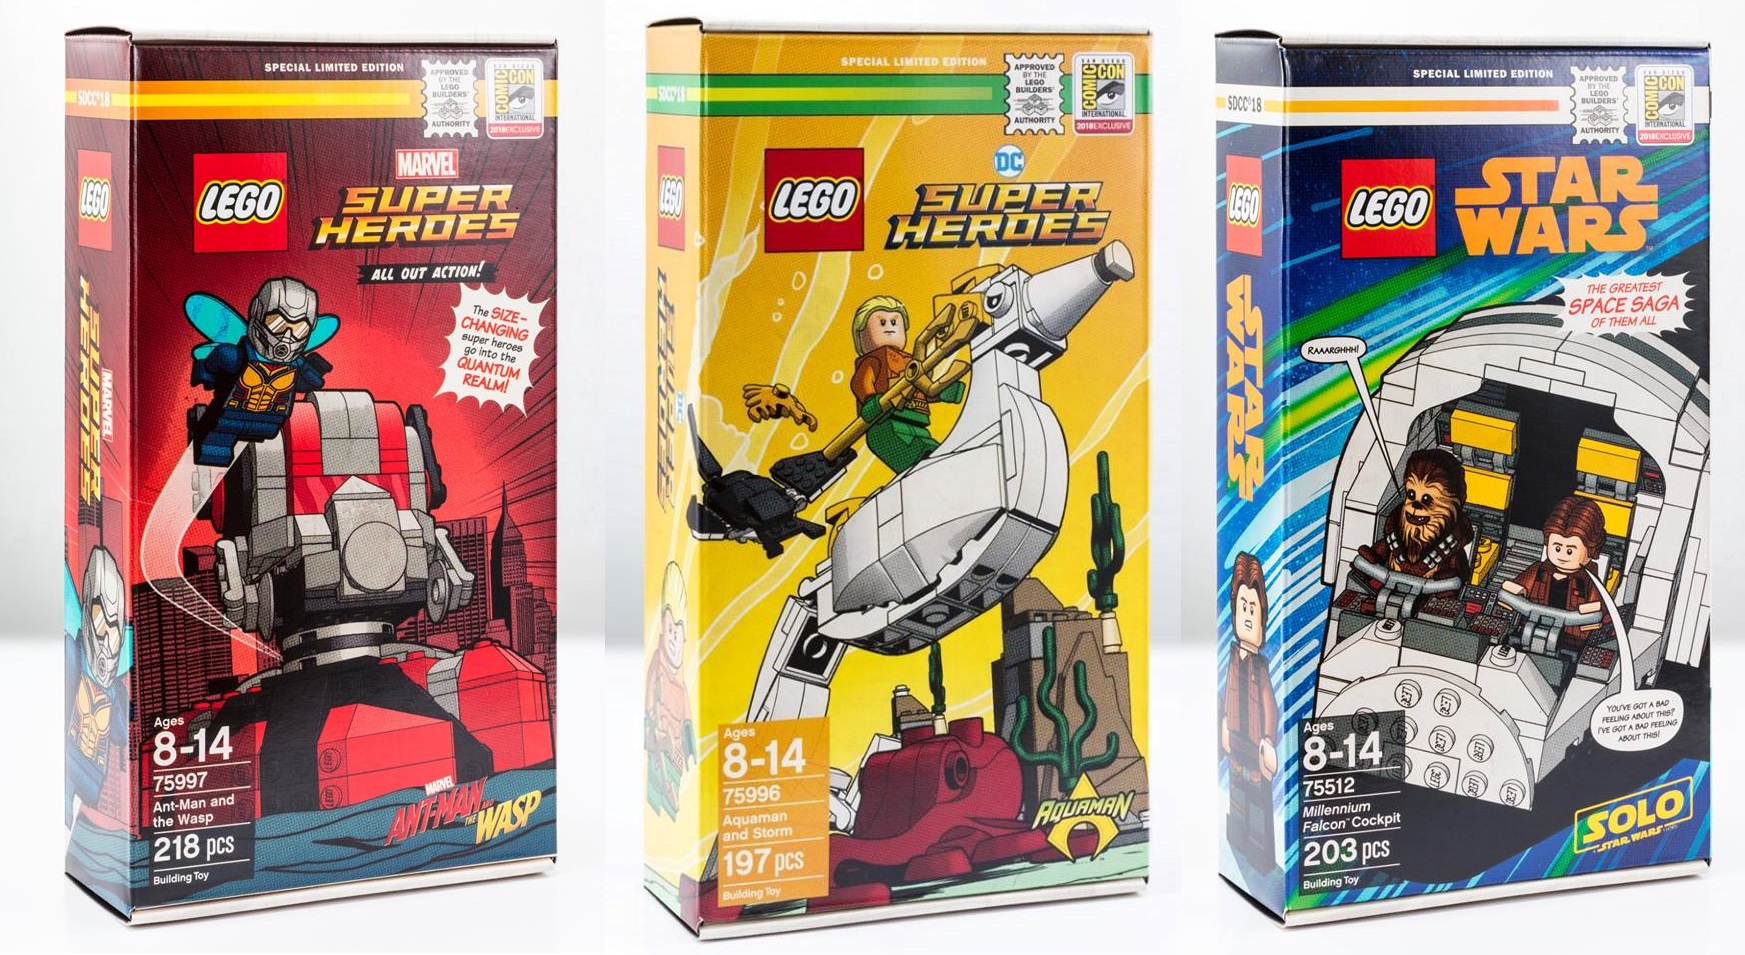 Lego SDCC 2018 Set Promotions 75997 with Minifigures - Minifigure Price